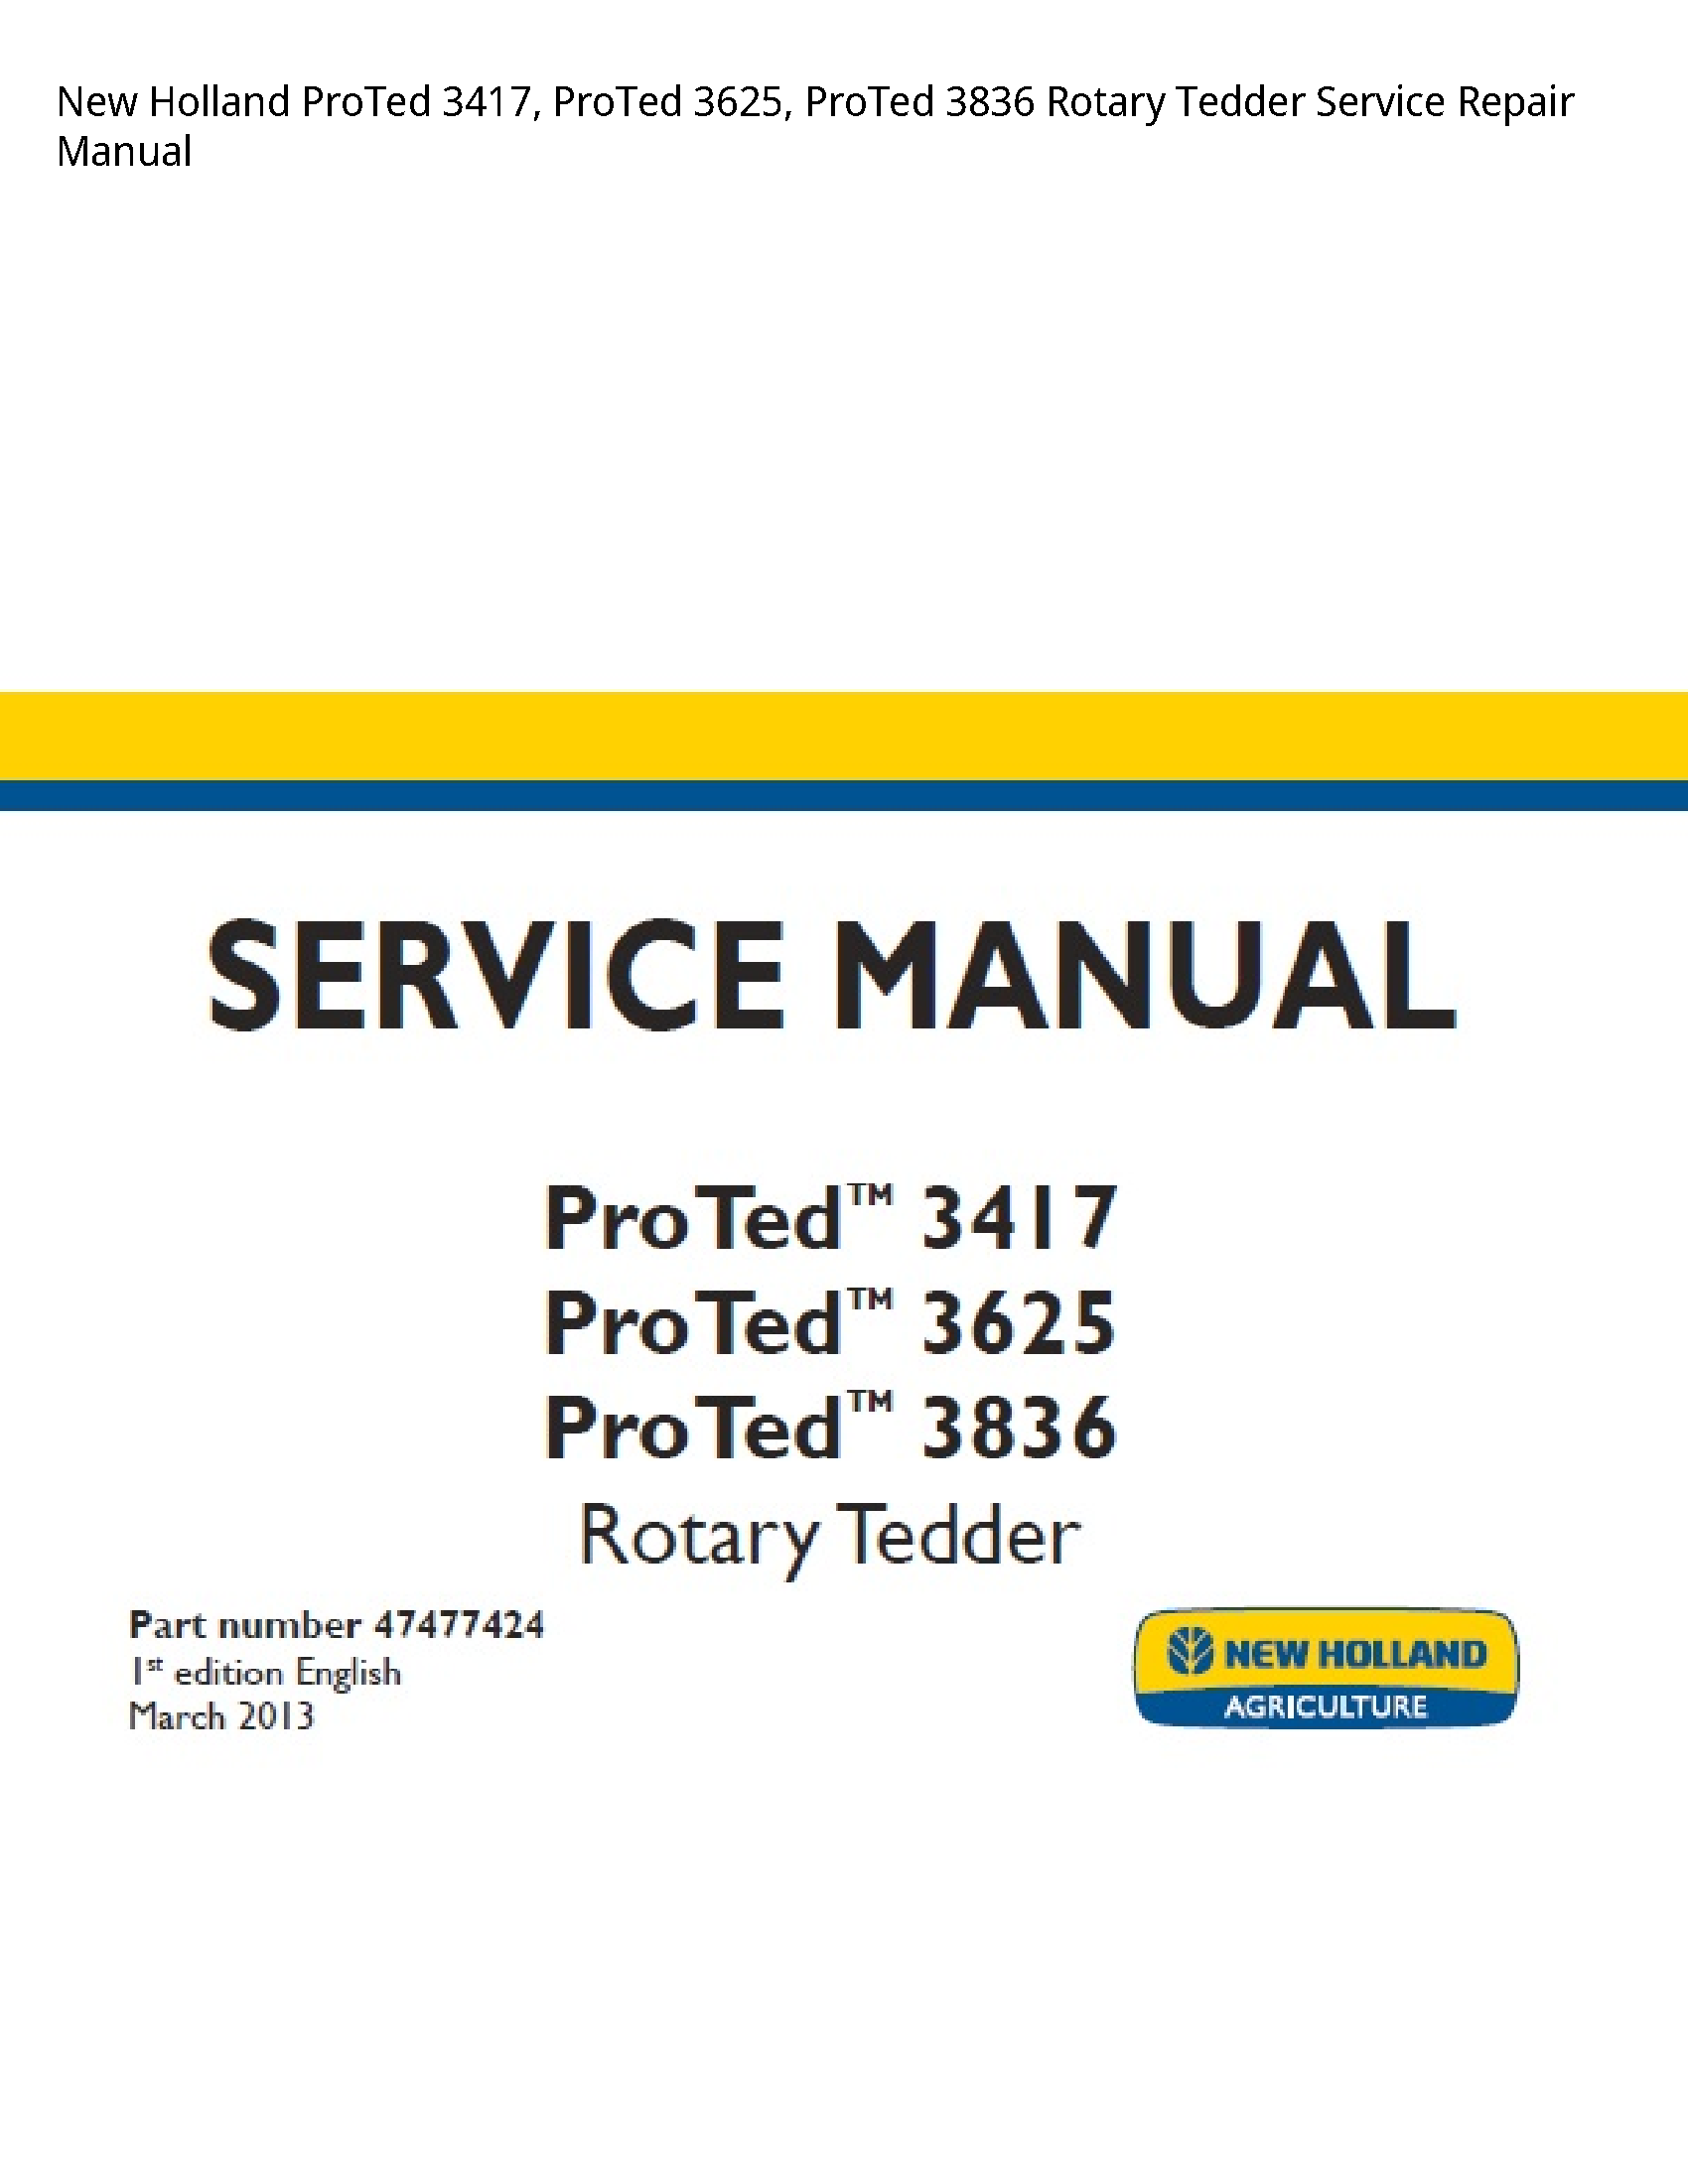 New Holland 3417 ProTed ProTed ProTed Rotary Tedder manual